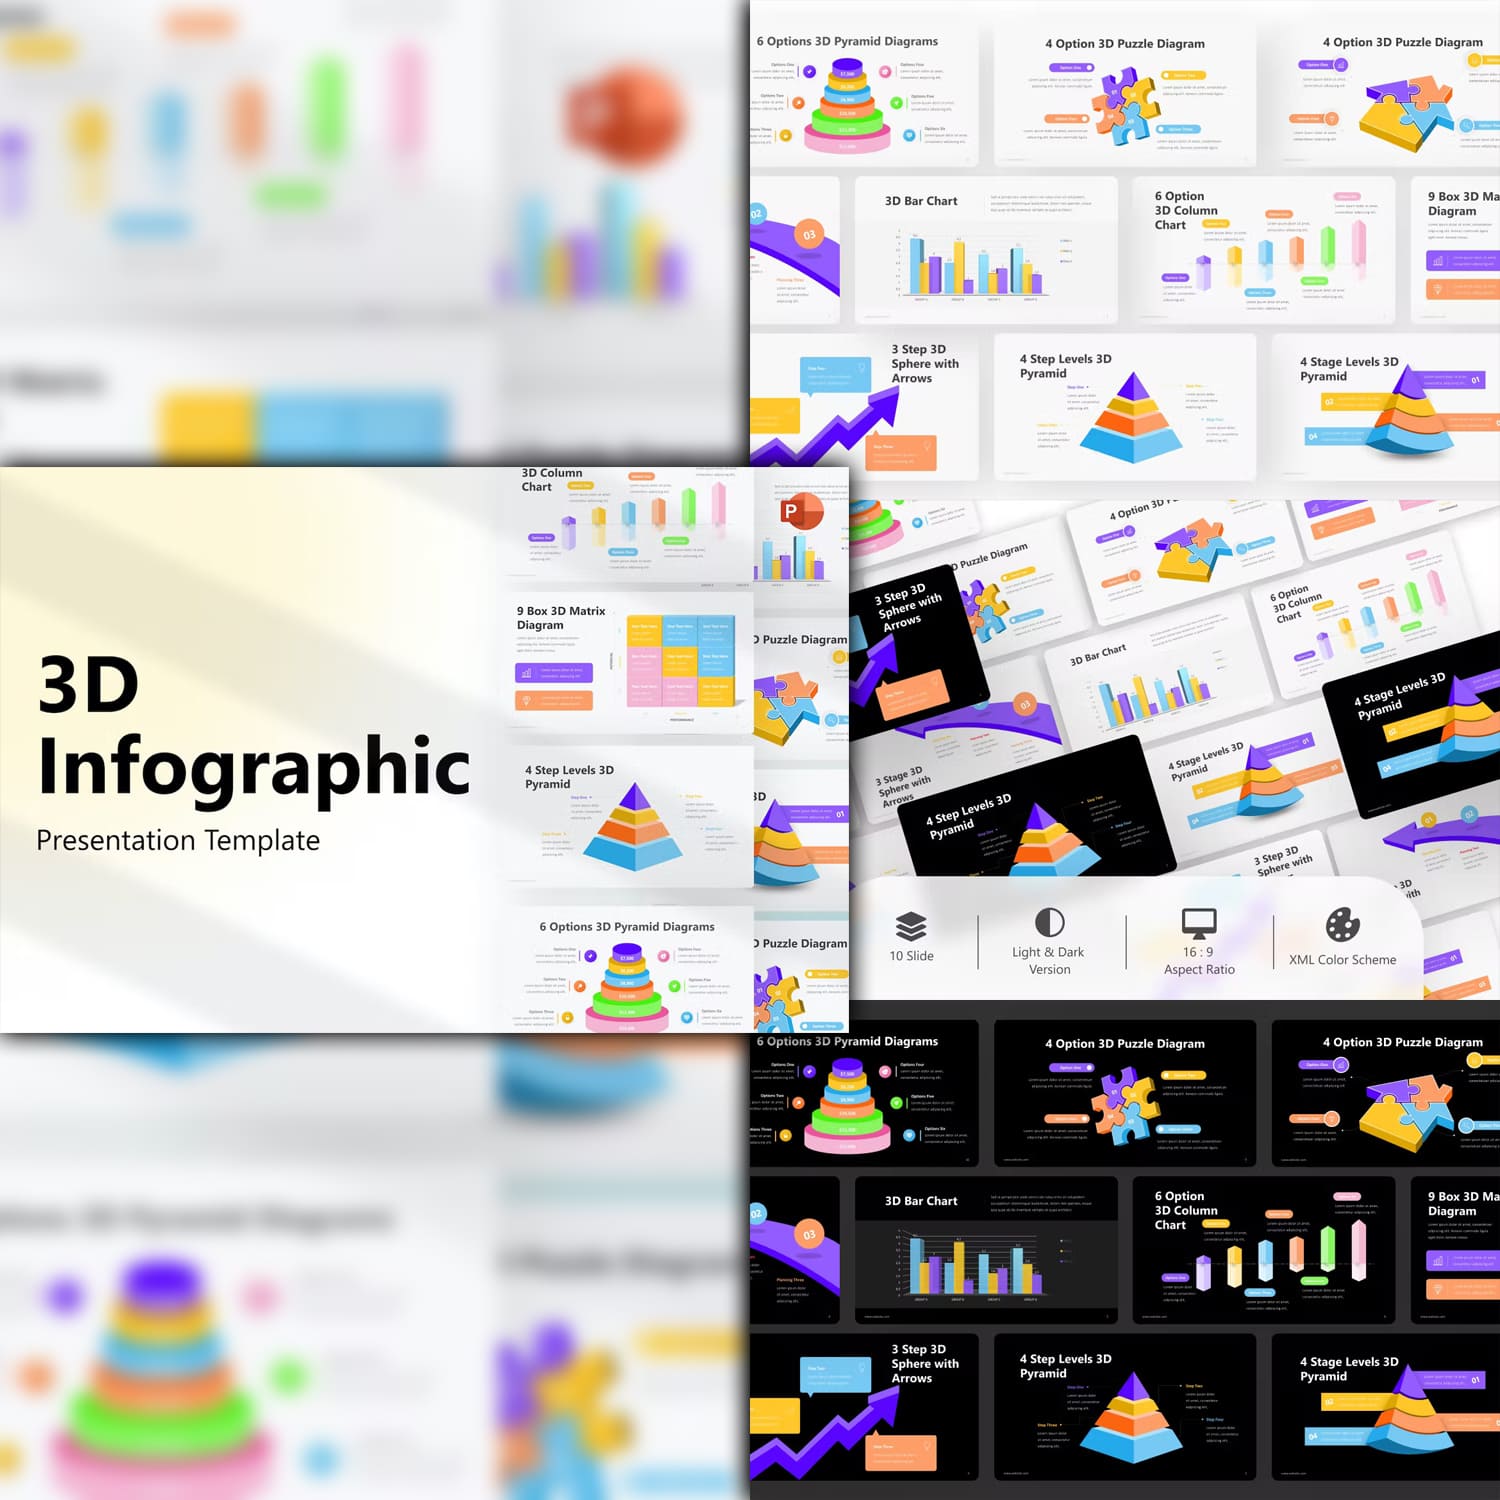 3d infographic powerpoint template from BrandEarth.